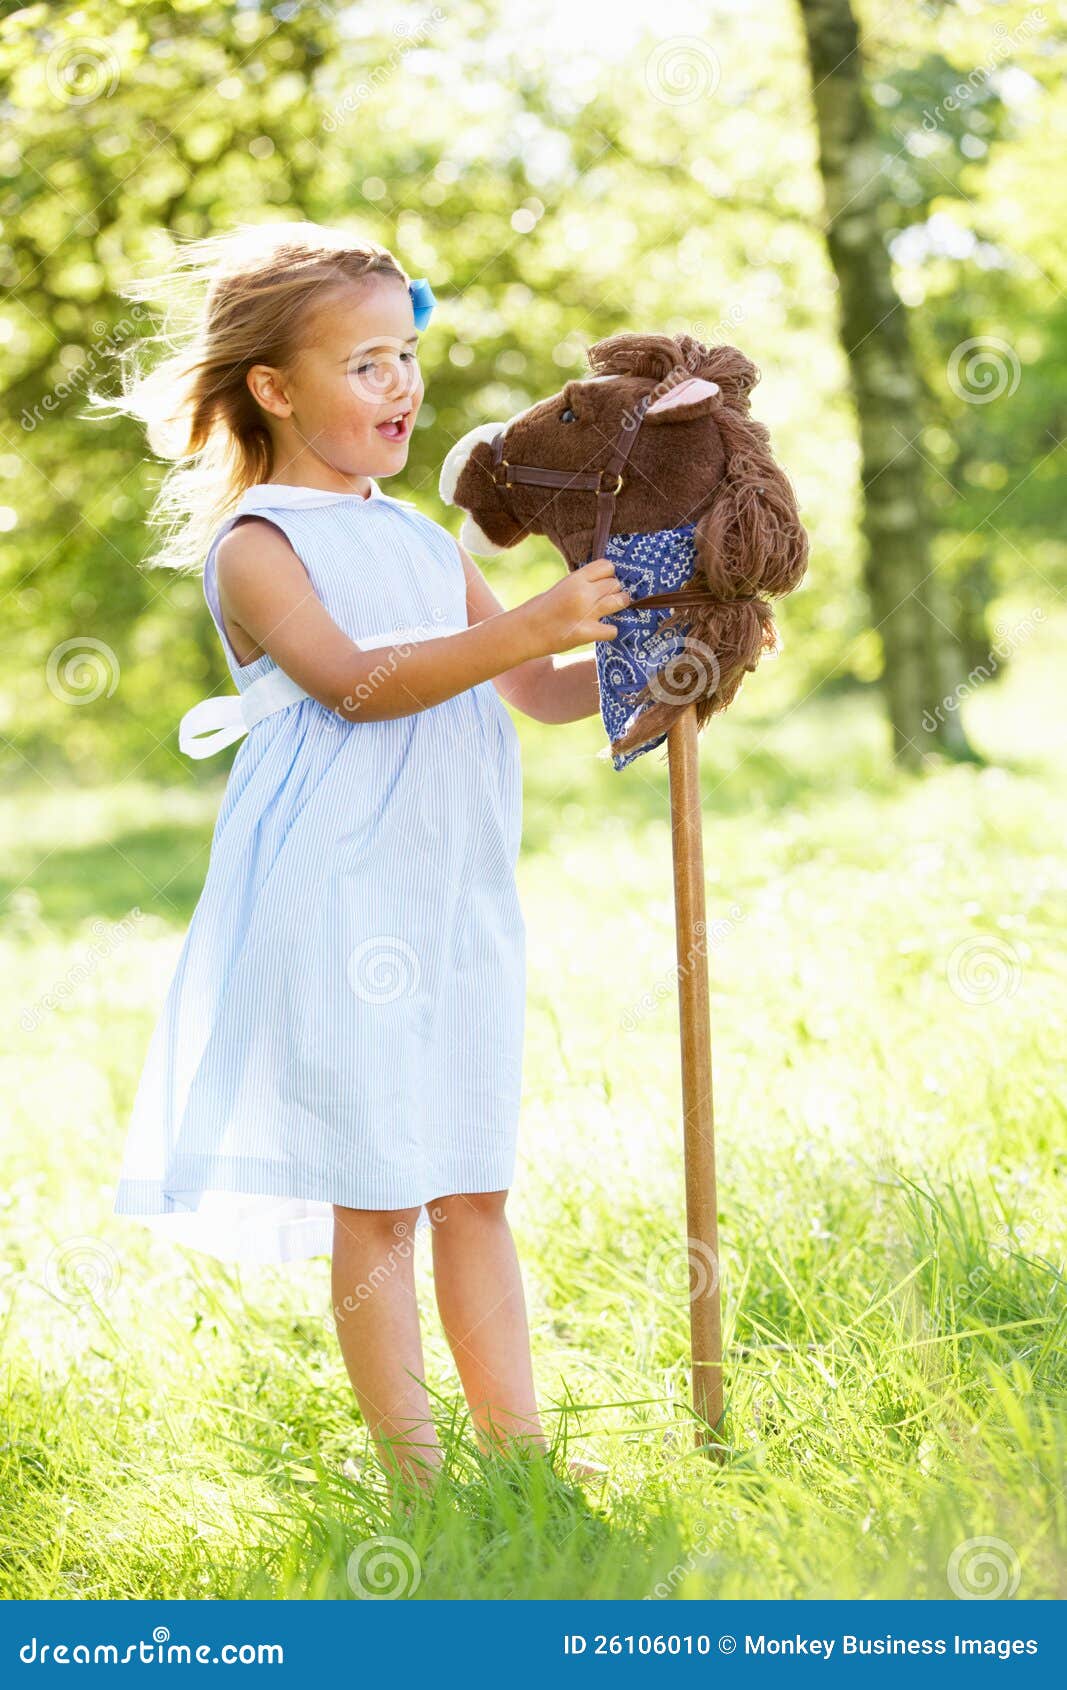 girl playing with hobby horse in summer field